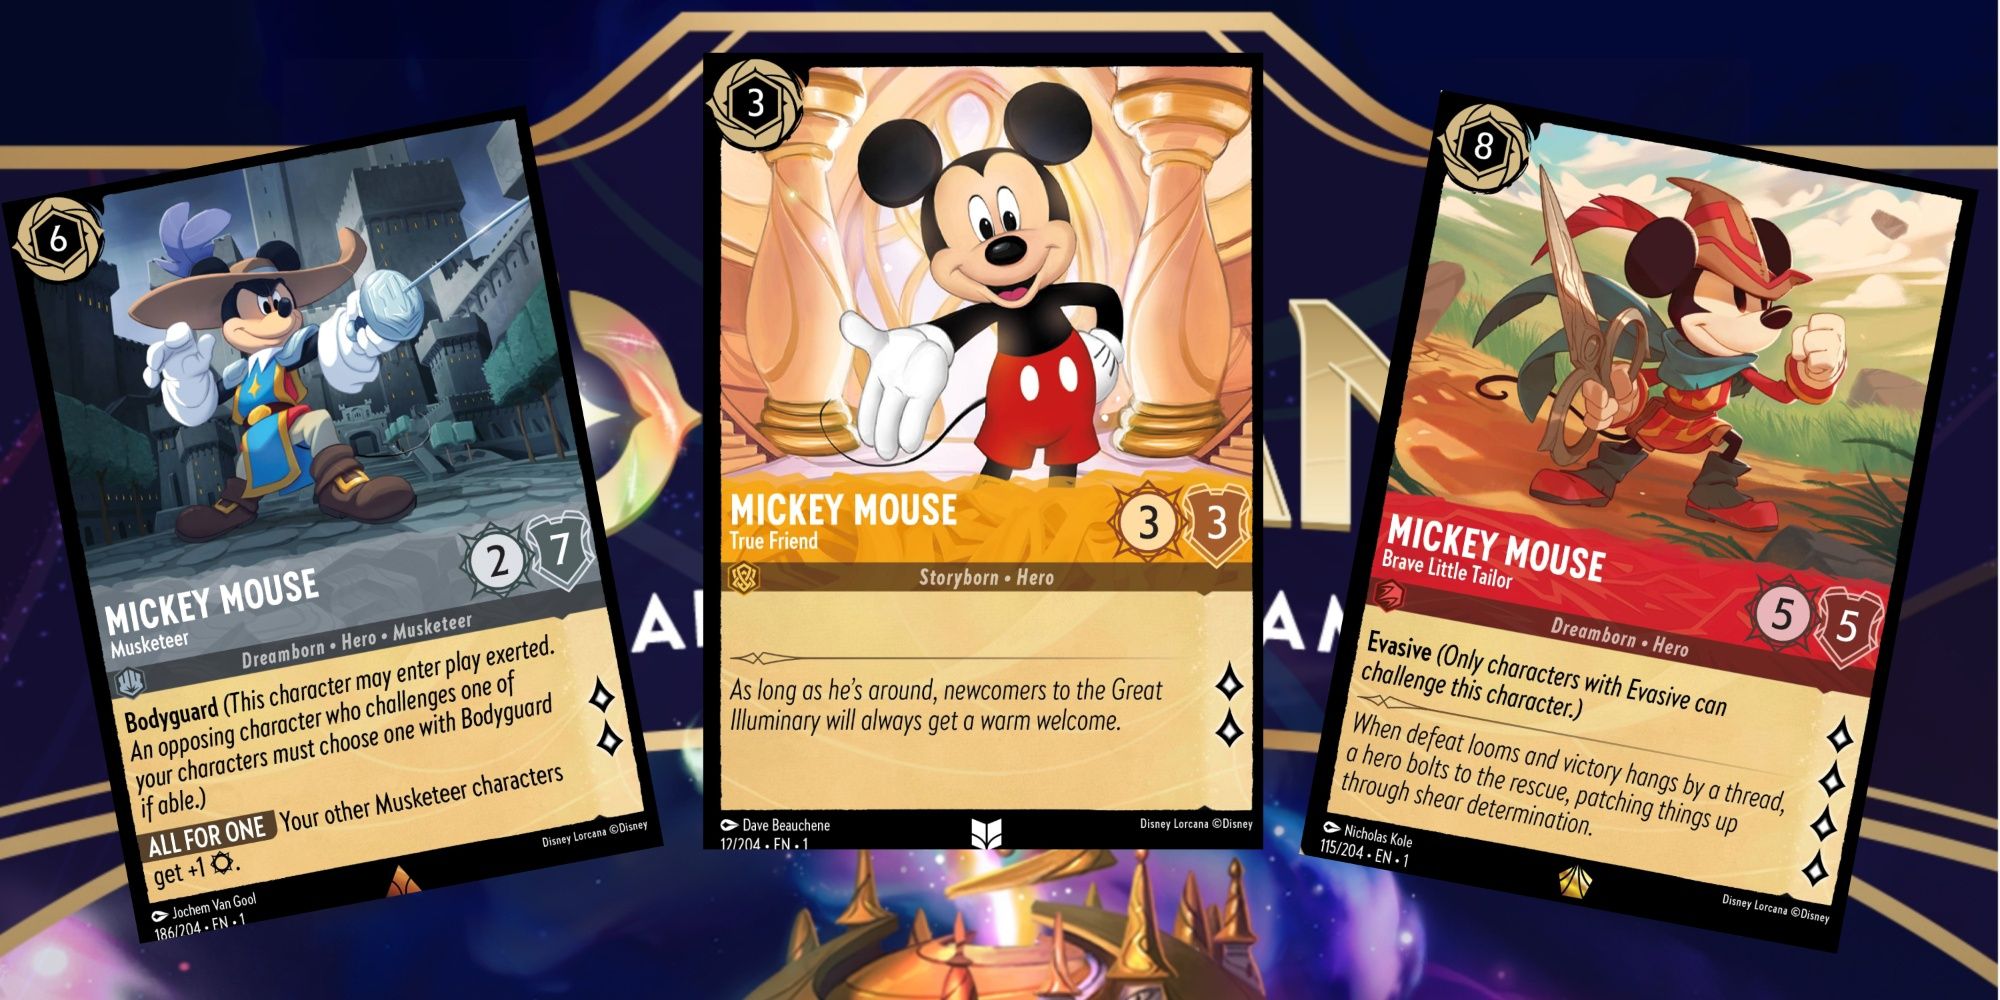 What Is Disney Lorcana? - Mouse TCG